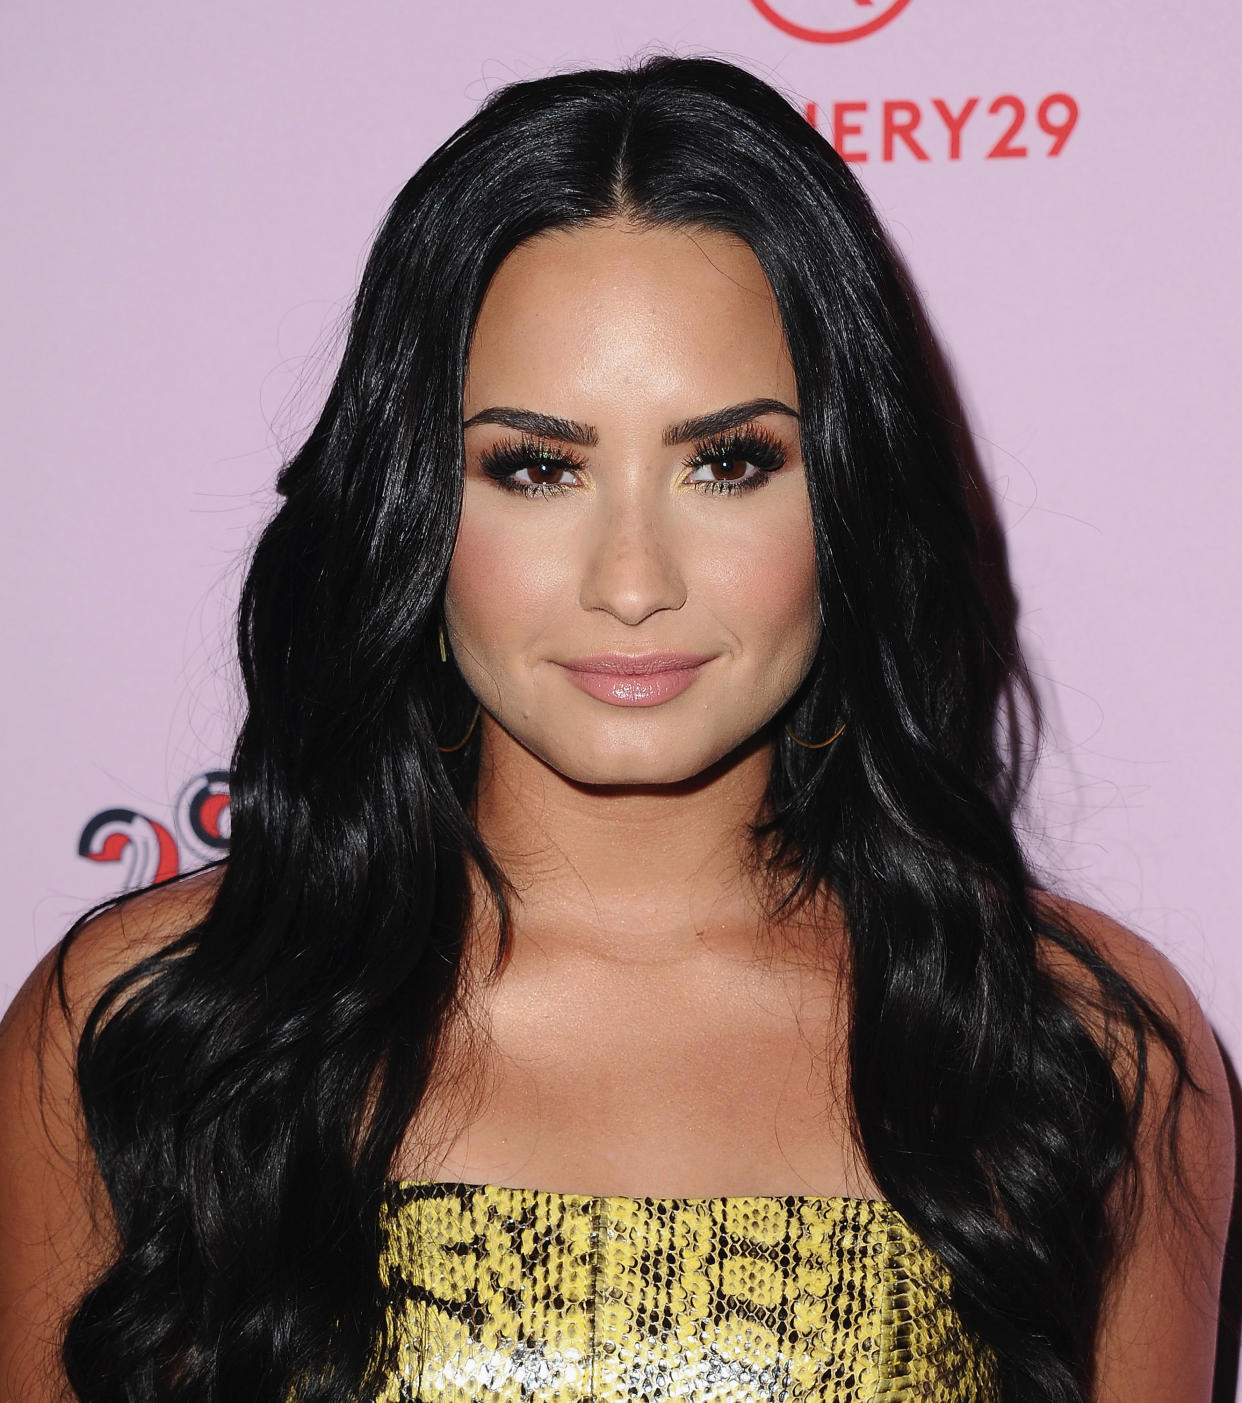 Demi Lovato&nbsp;was given naloxone before being taken to a hospital after an apparent drug overdose on July 24. Although naloxone can save lives, access to it in the U.S. is very limited. (Photo: Jon Kopaloff / Getty Images)